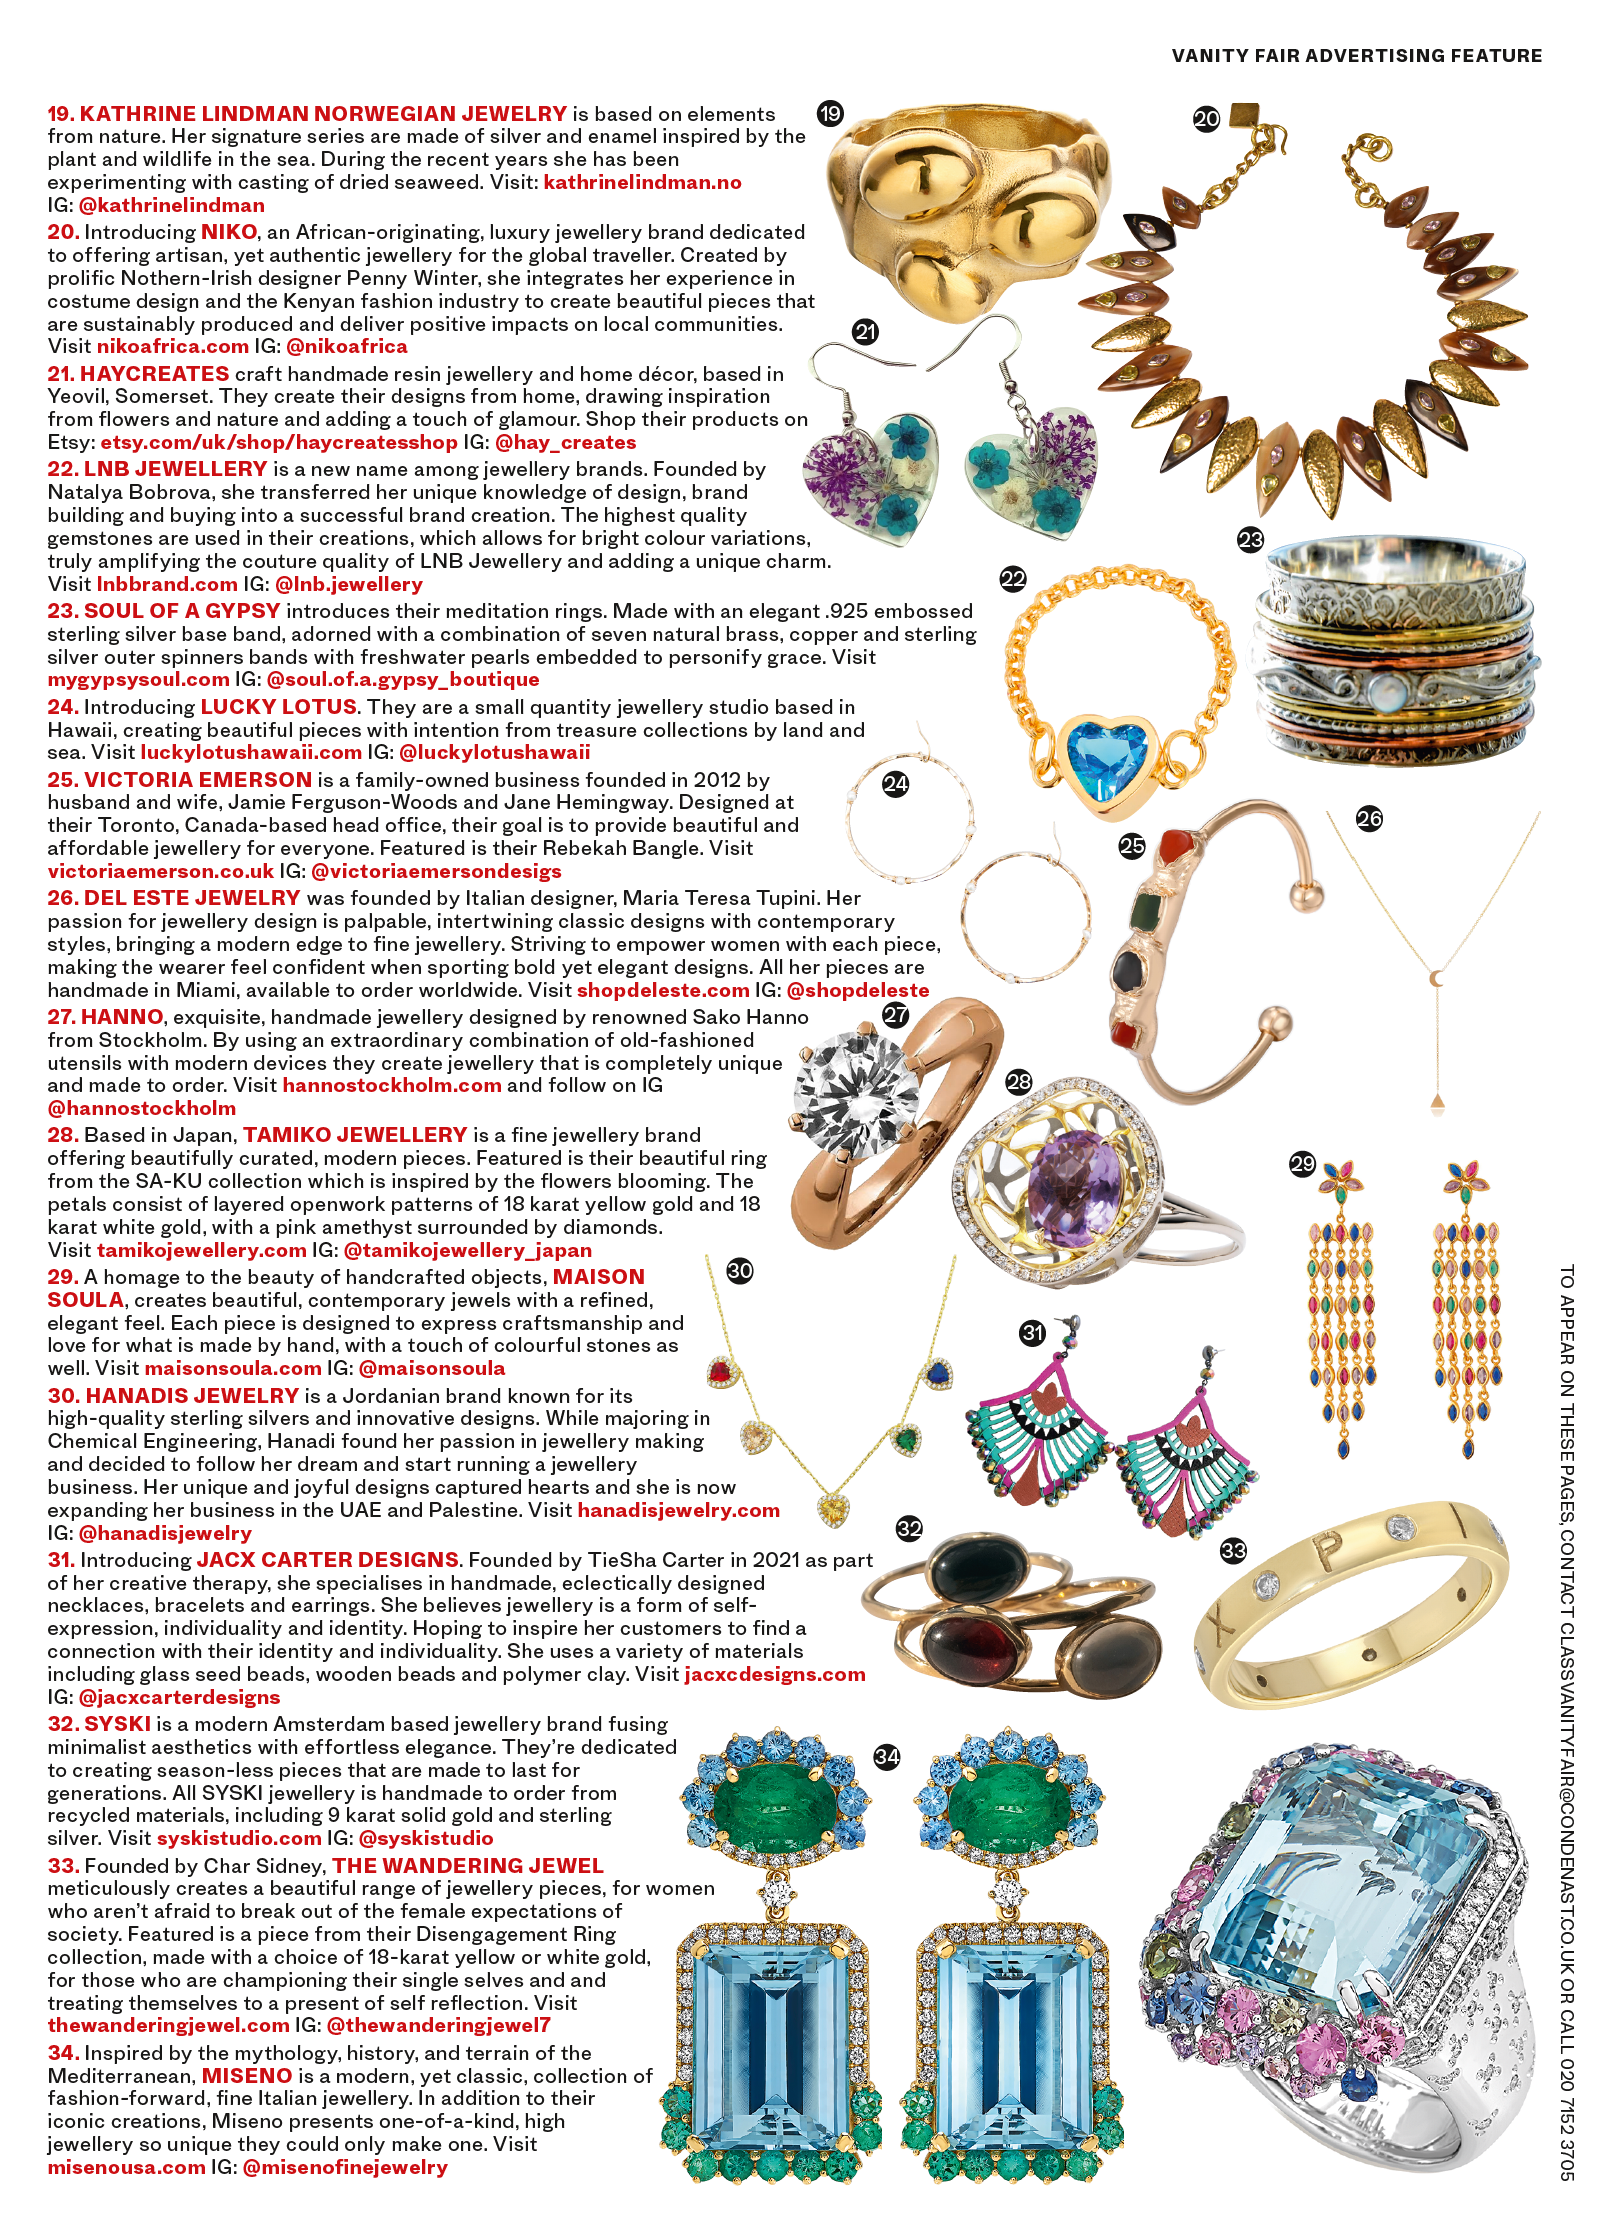 house and Garden magazine featuring the pillbox disengagement Ring from the wandering jewel